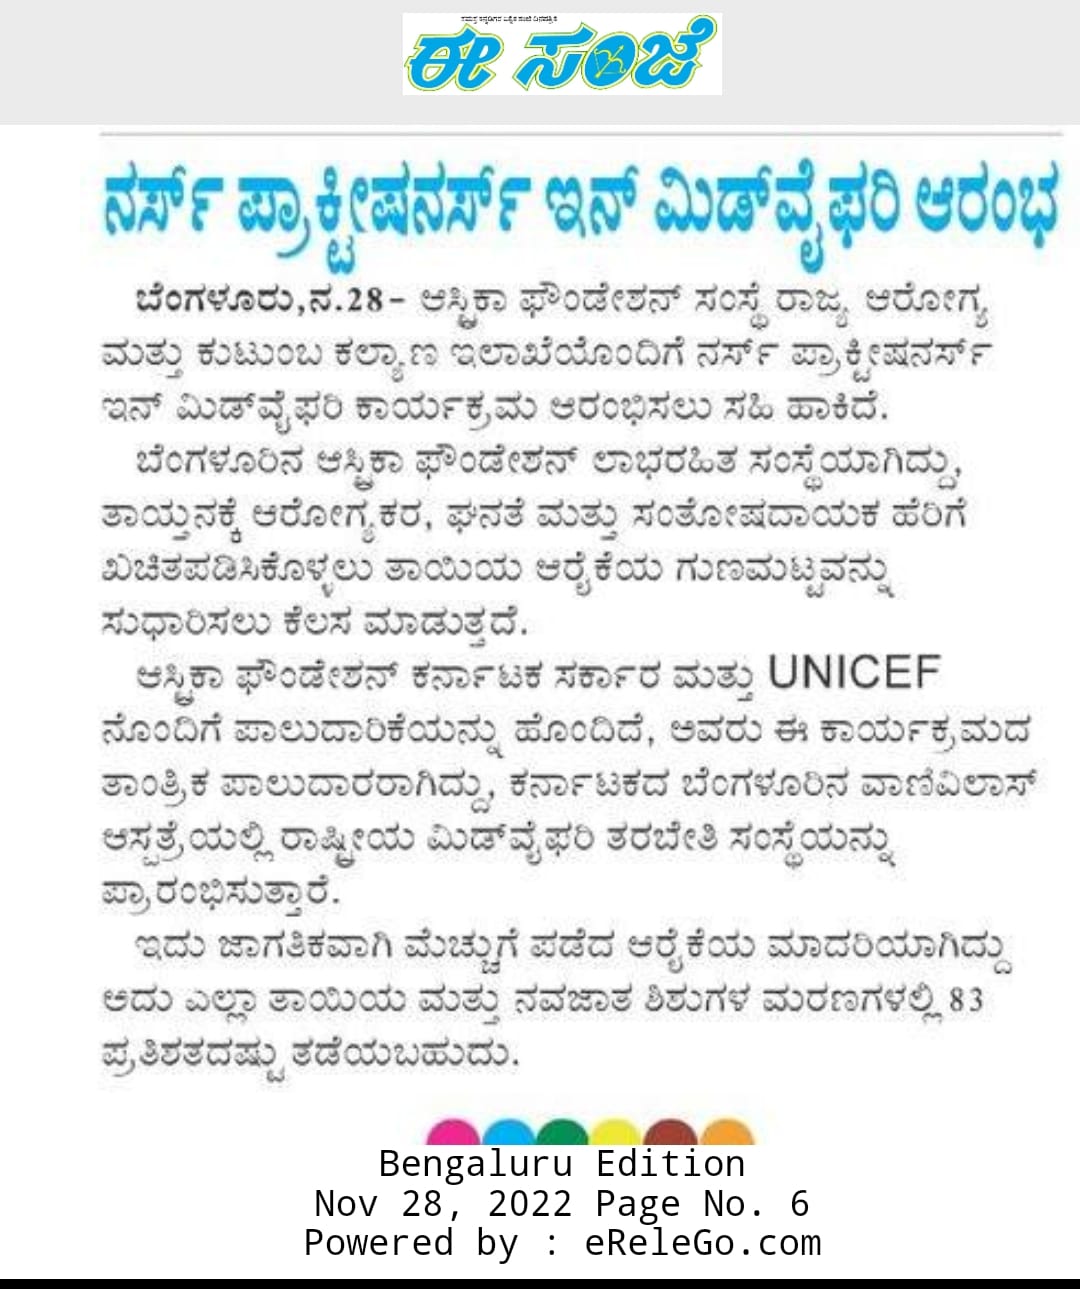 Article in the Kannada evening daily, Eesanje, about the commencement of the training for Nurse Practitioners.